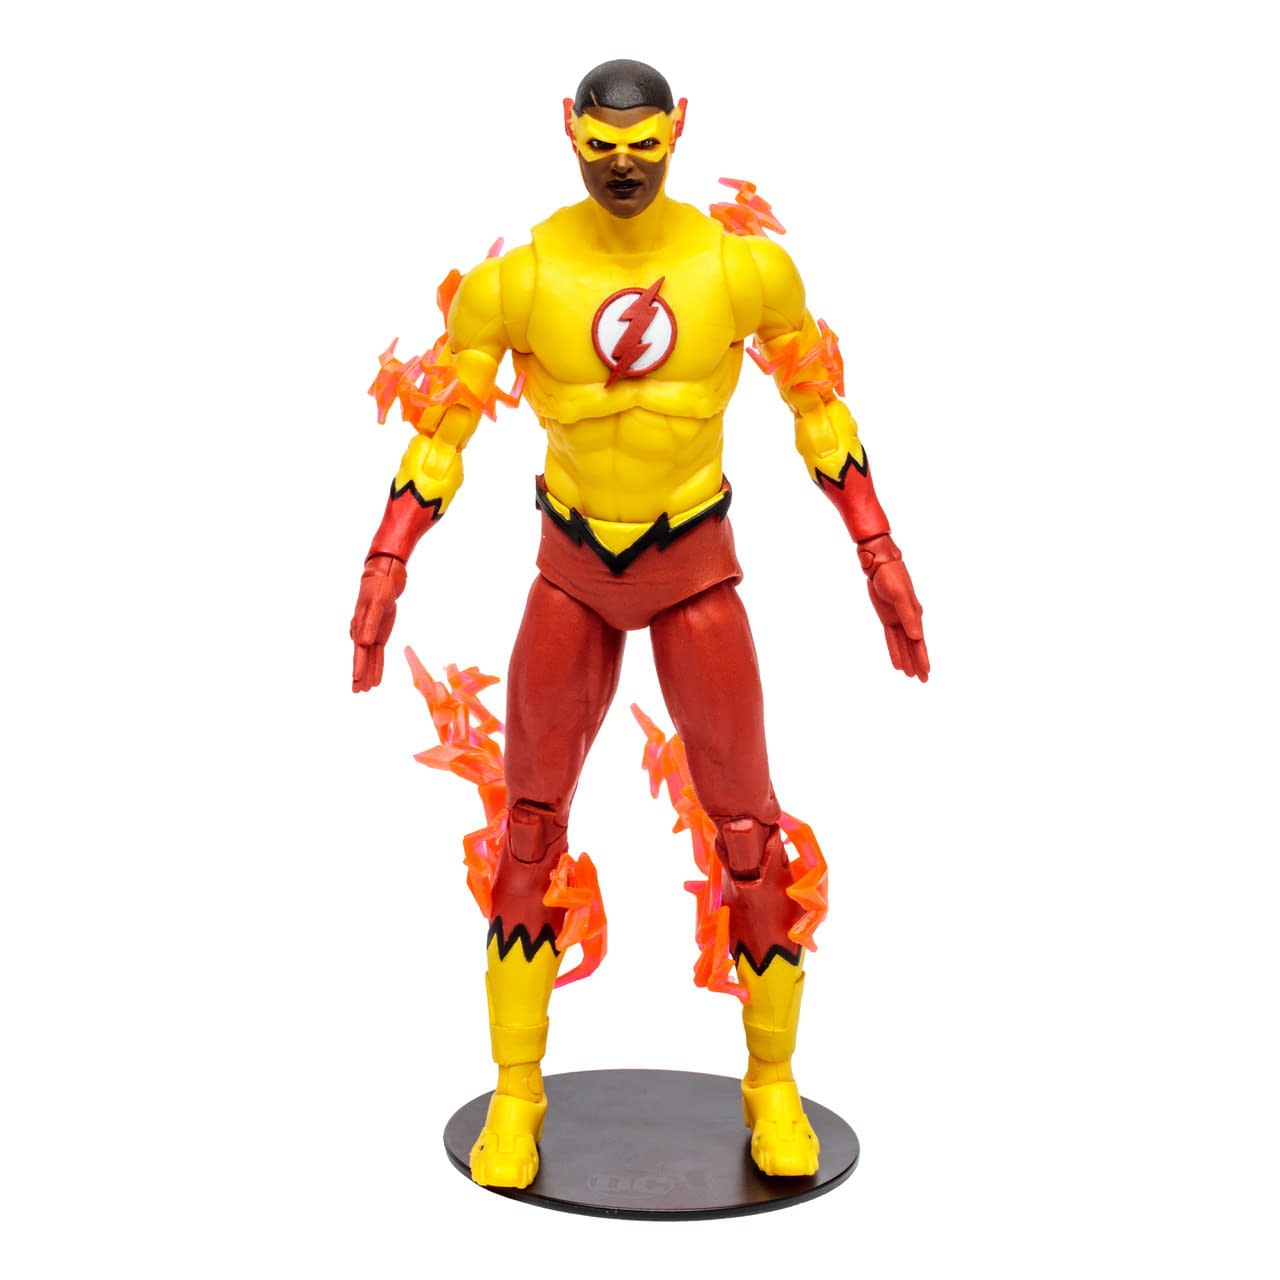 DC Comics Kid Flash Joins the Flash Family with McFarlane Toys 